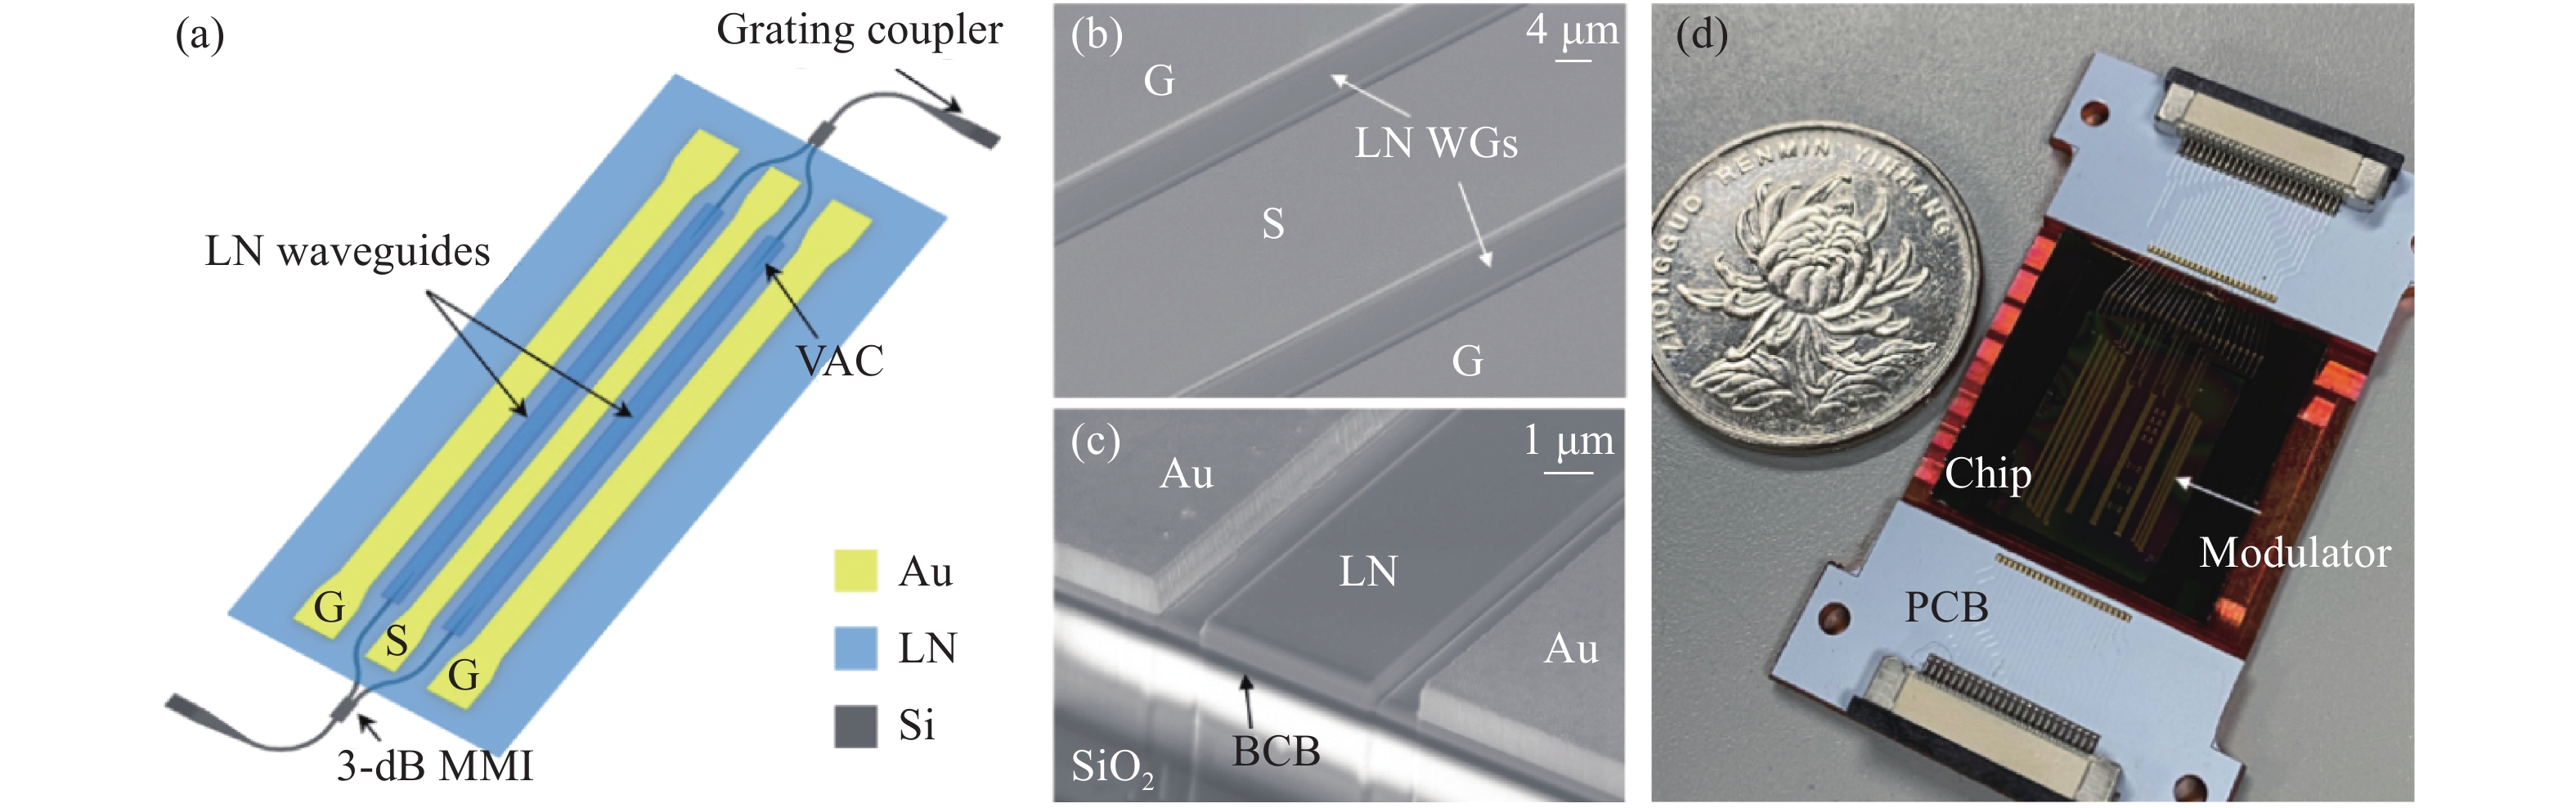 Hybrid silicon and lithium niobate electro-optical modulator. (a) Schematic of Mach-Zender intensity modulator; (b) SEM image of lithium niobate phase modulation region; (c) The cross section SEM image of the modulation region, the section is formed by the focused ion beam process; (d) Image of the whole chip